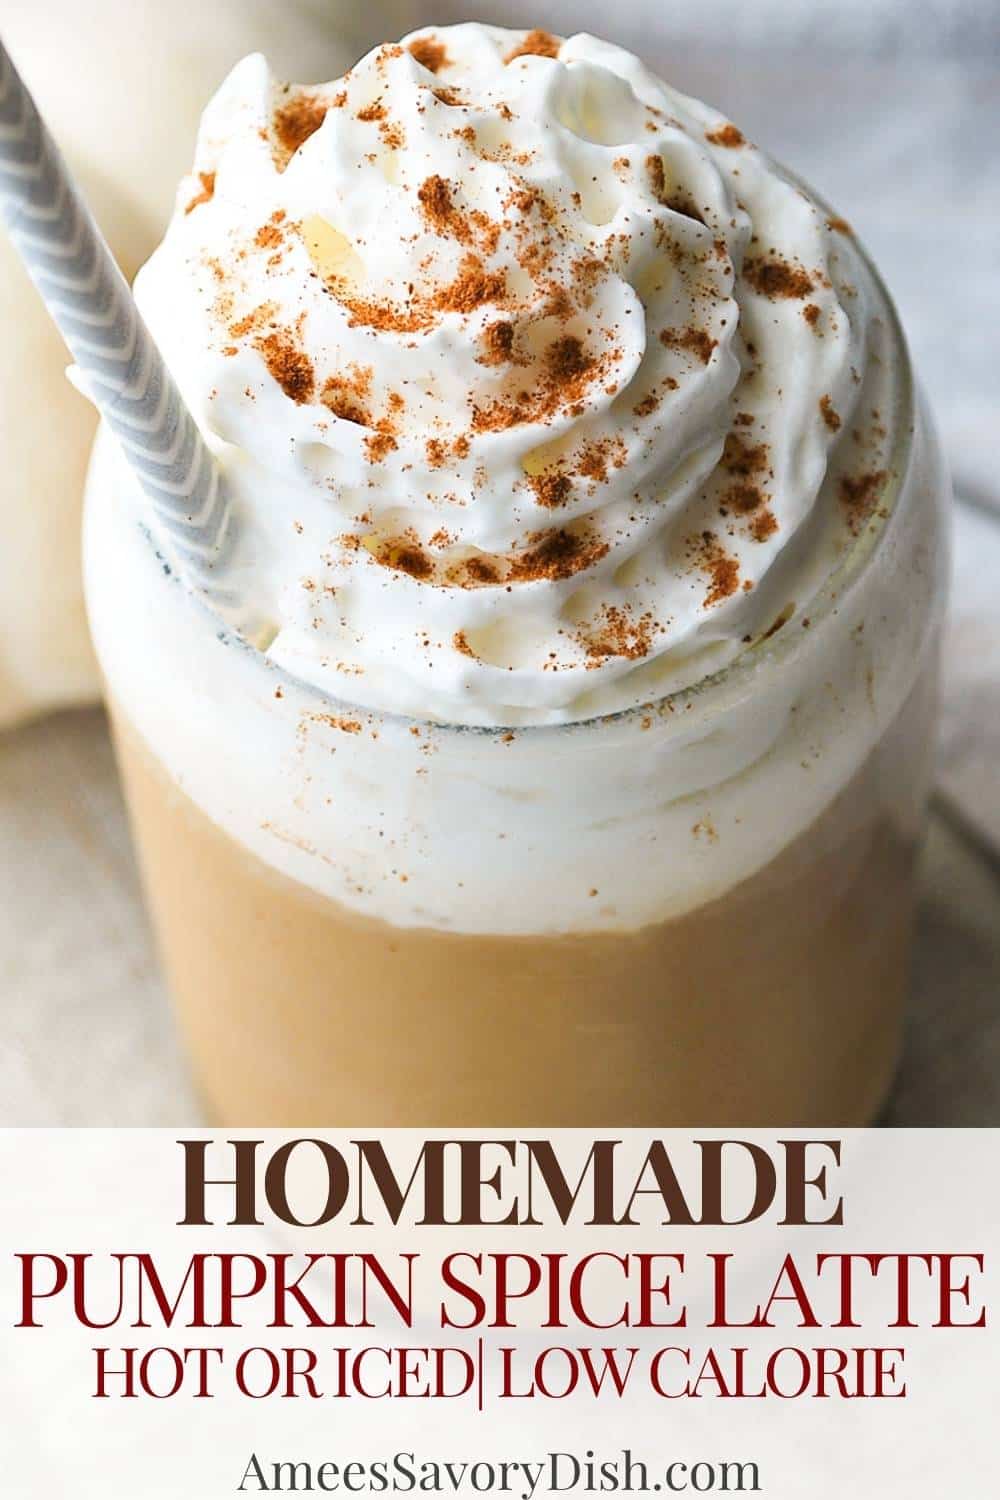 This pumpkin spice latte is delicious, made with real pumpkin puree and creamy nut milk with fewer calories than the Starbucks version. Recipe for iced and hot. via @Ameessavorydish